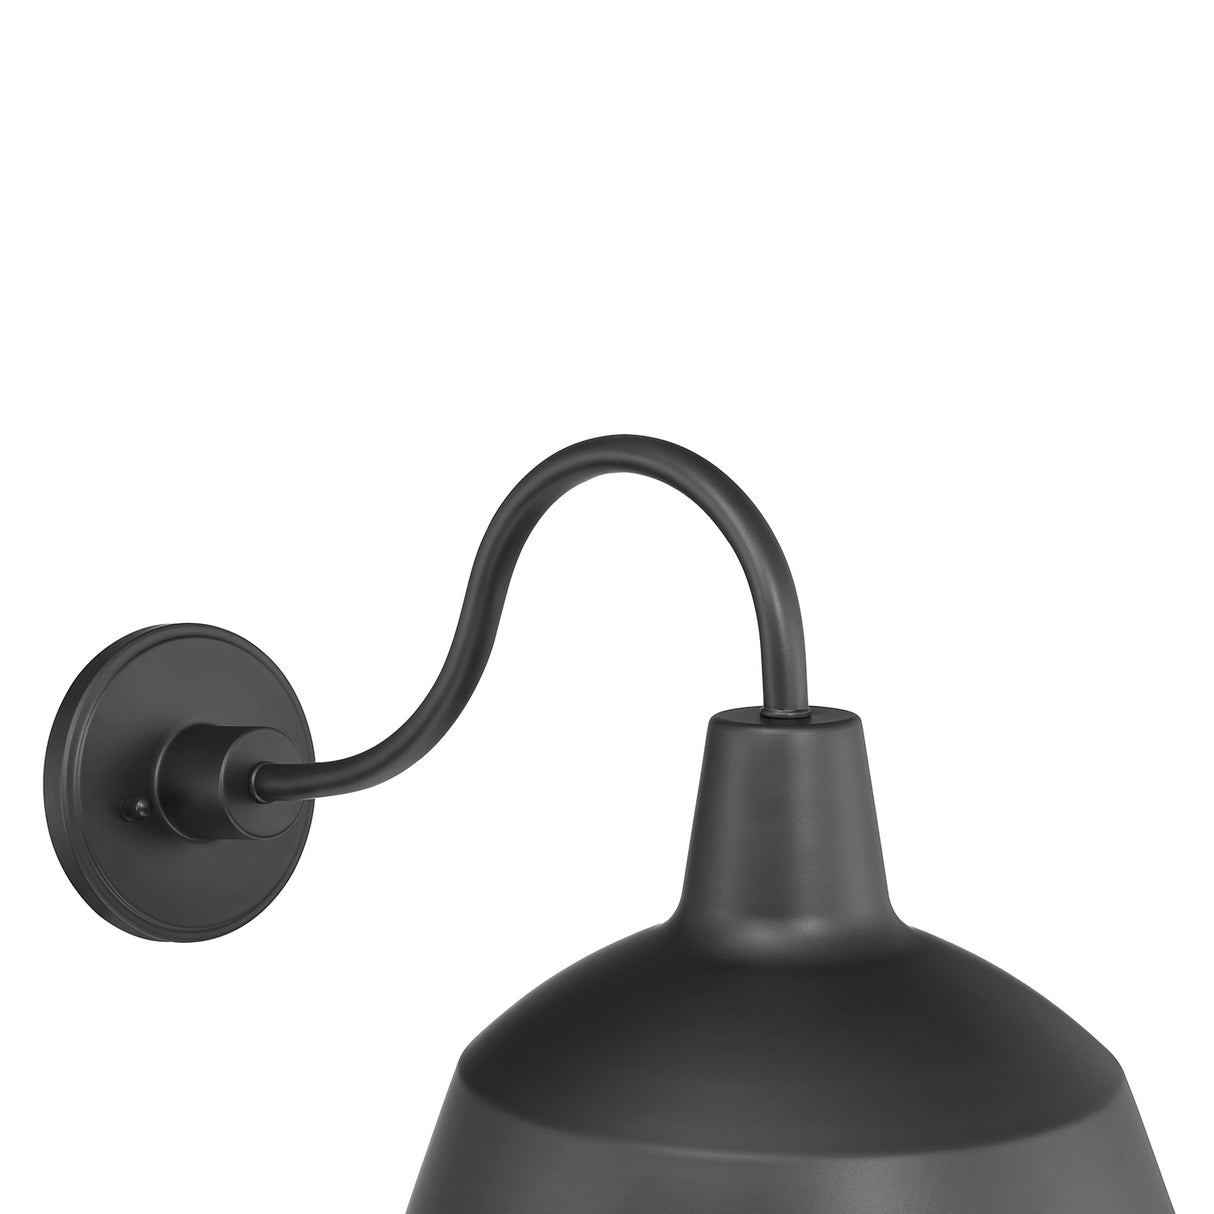 Asher Small Outdoor Wall Light, Black